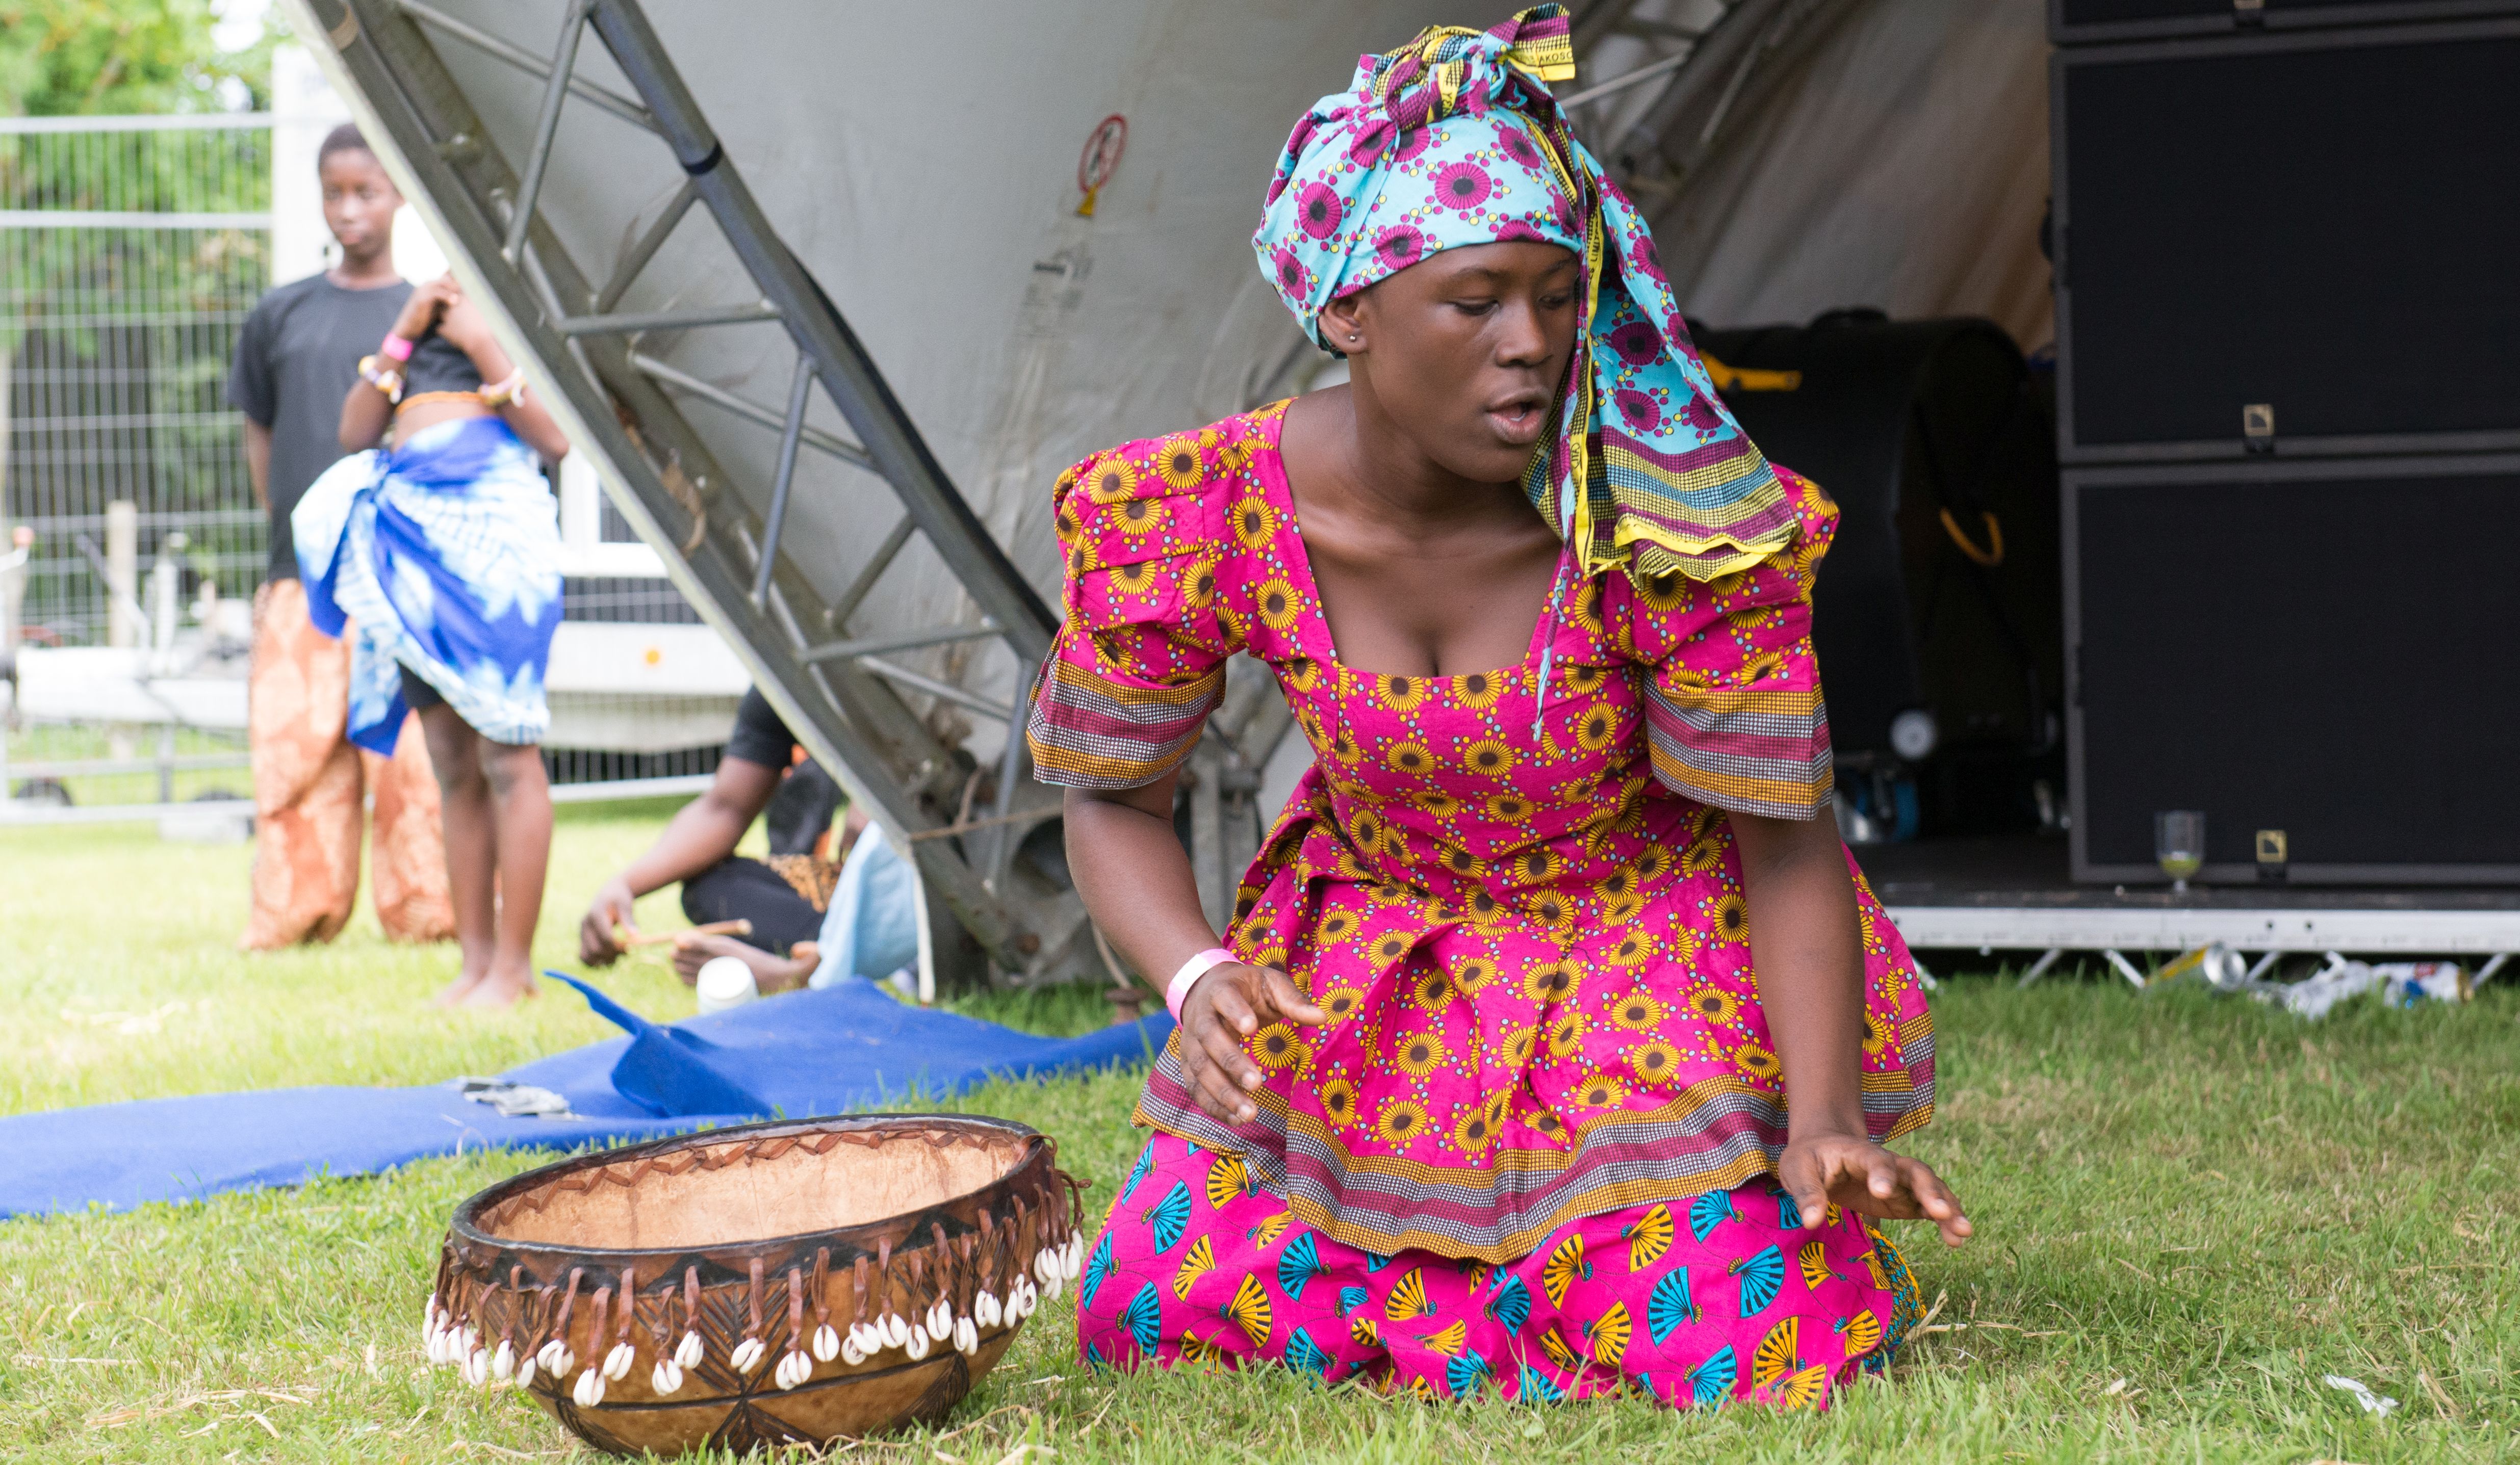 Performance by Noyam African Dance Institute at the Solas festival 2017